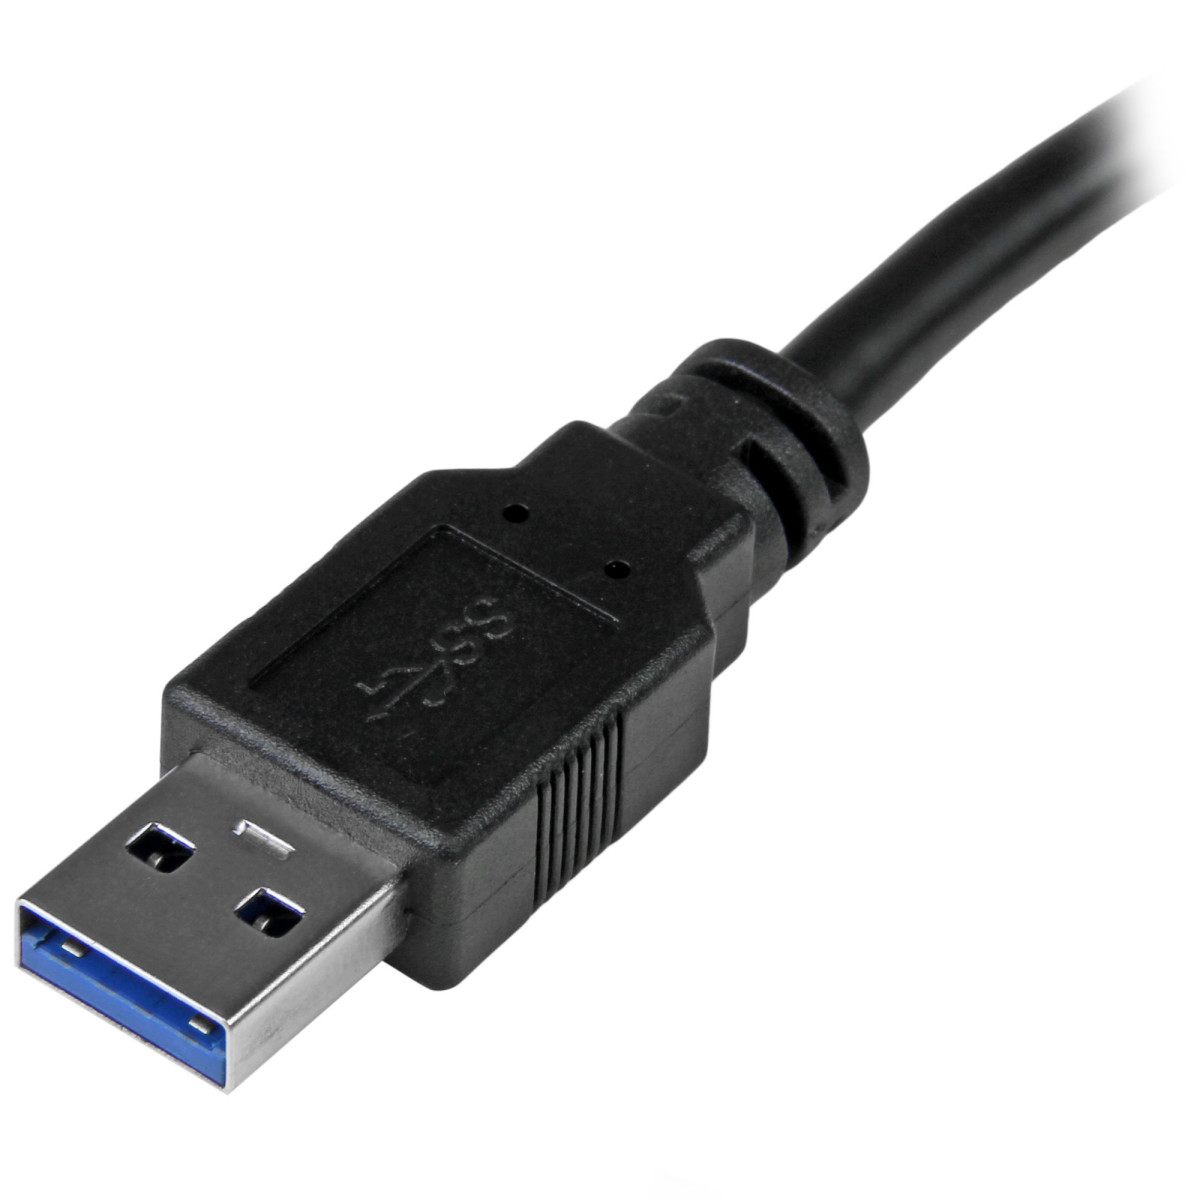 USB 3.1 Gen 2 (10Gbps) Adapter Cable for